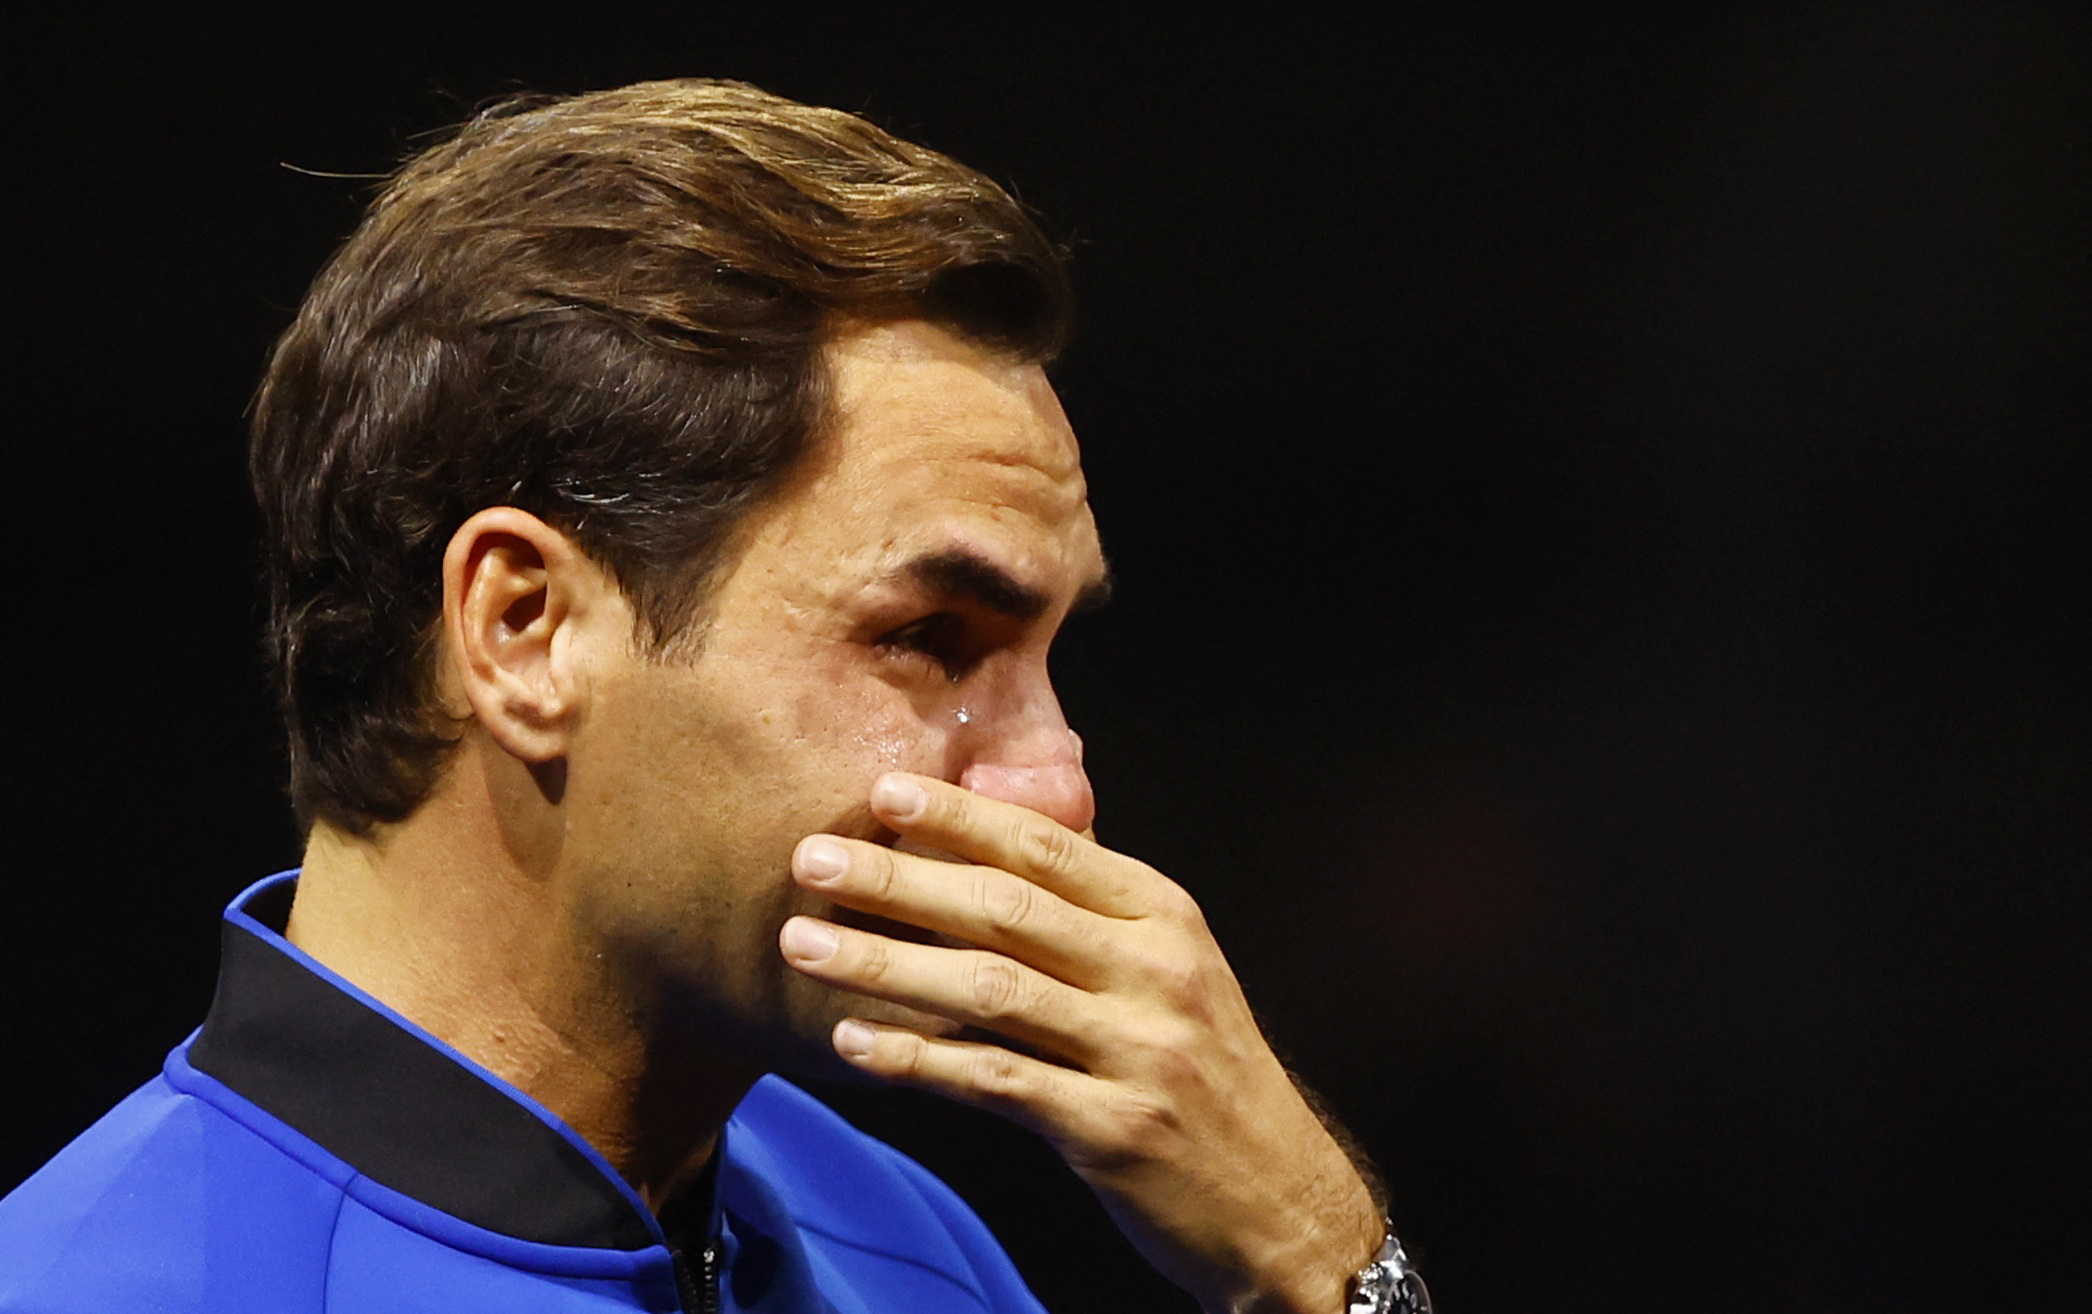 Roger couldn't hold back tears as he left (Reuters/Andrew Boyers)